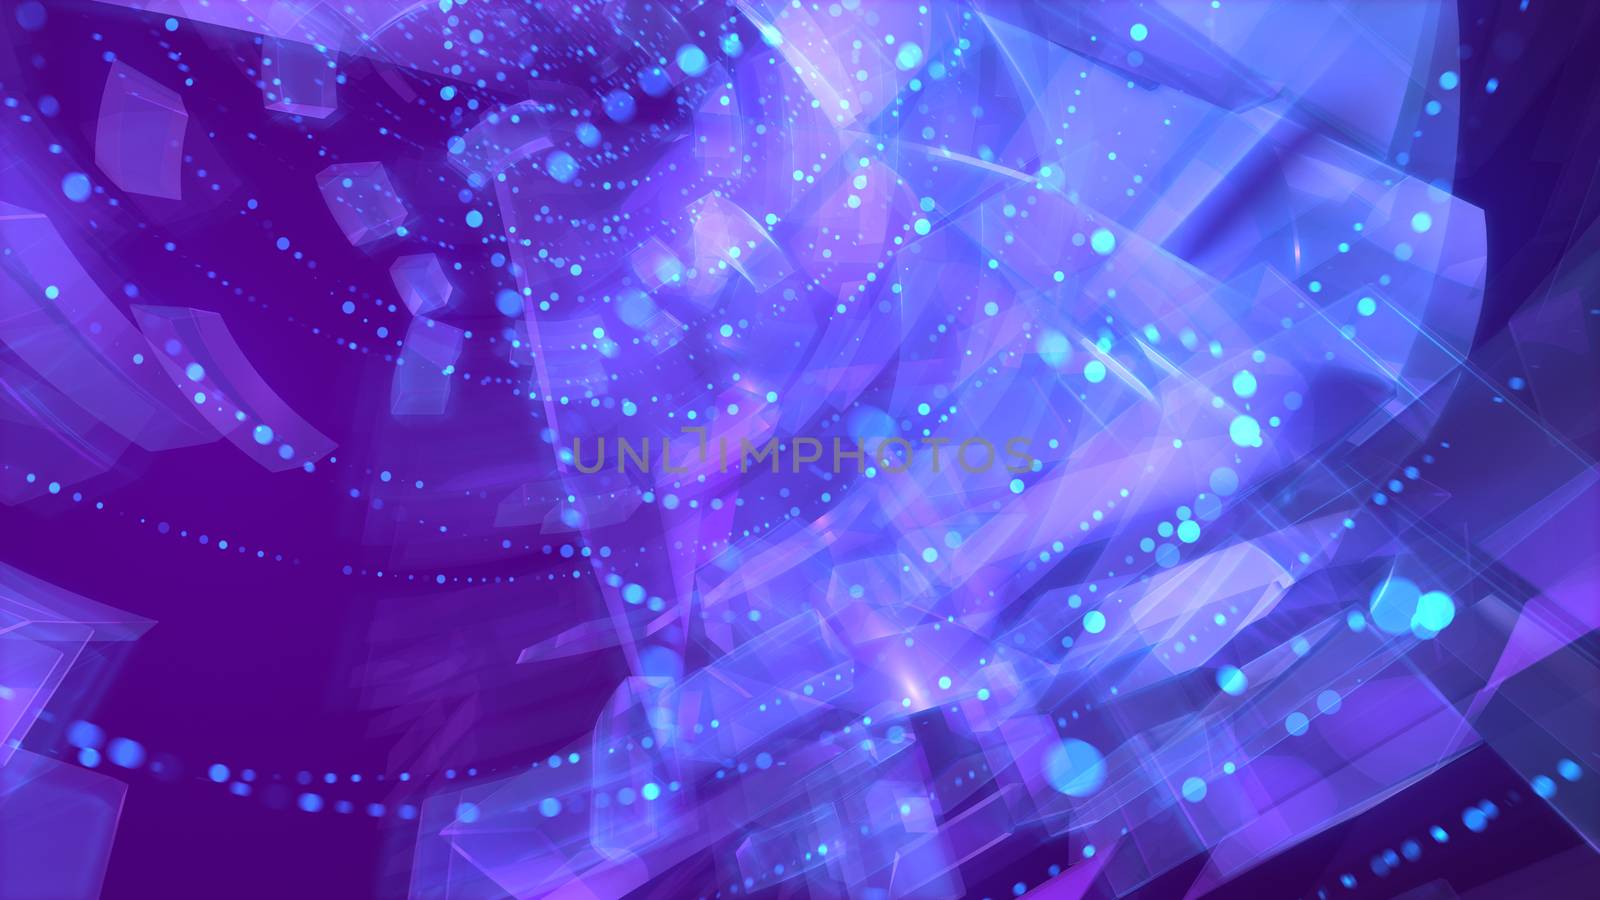 Whirling spirals in violet time portal by klss